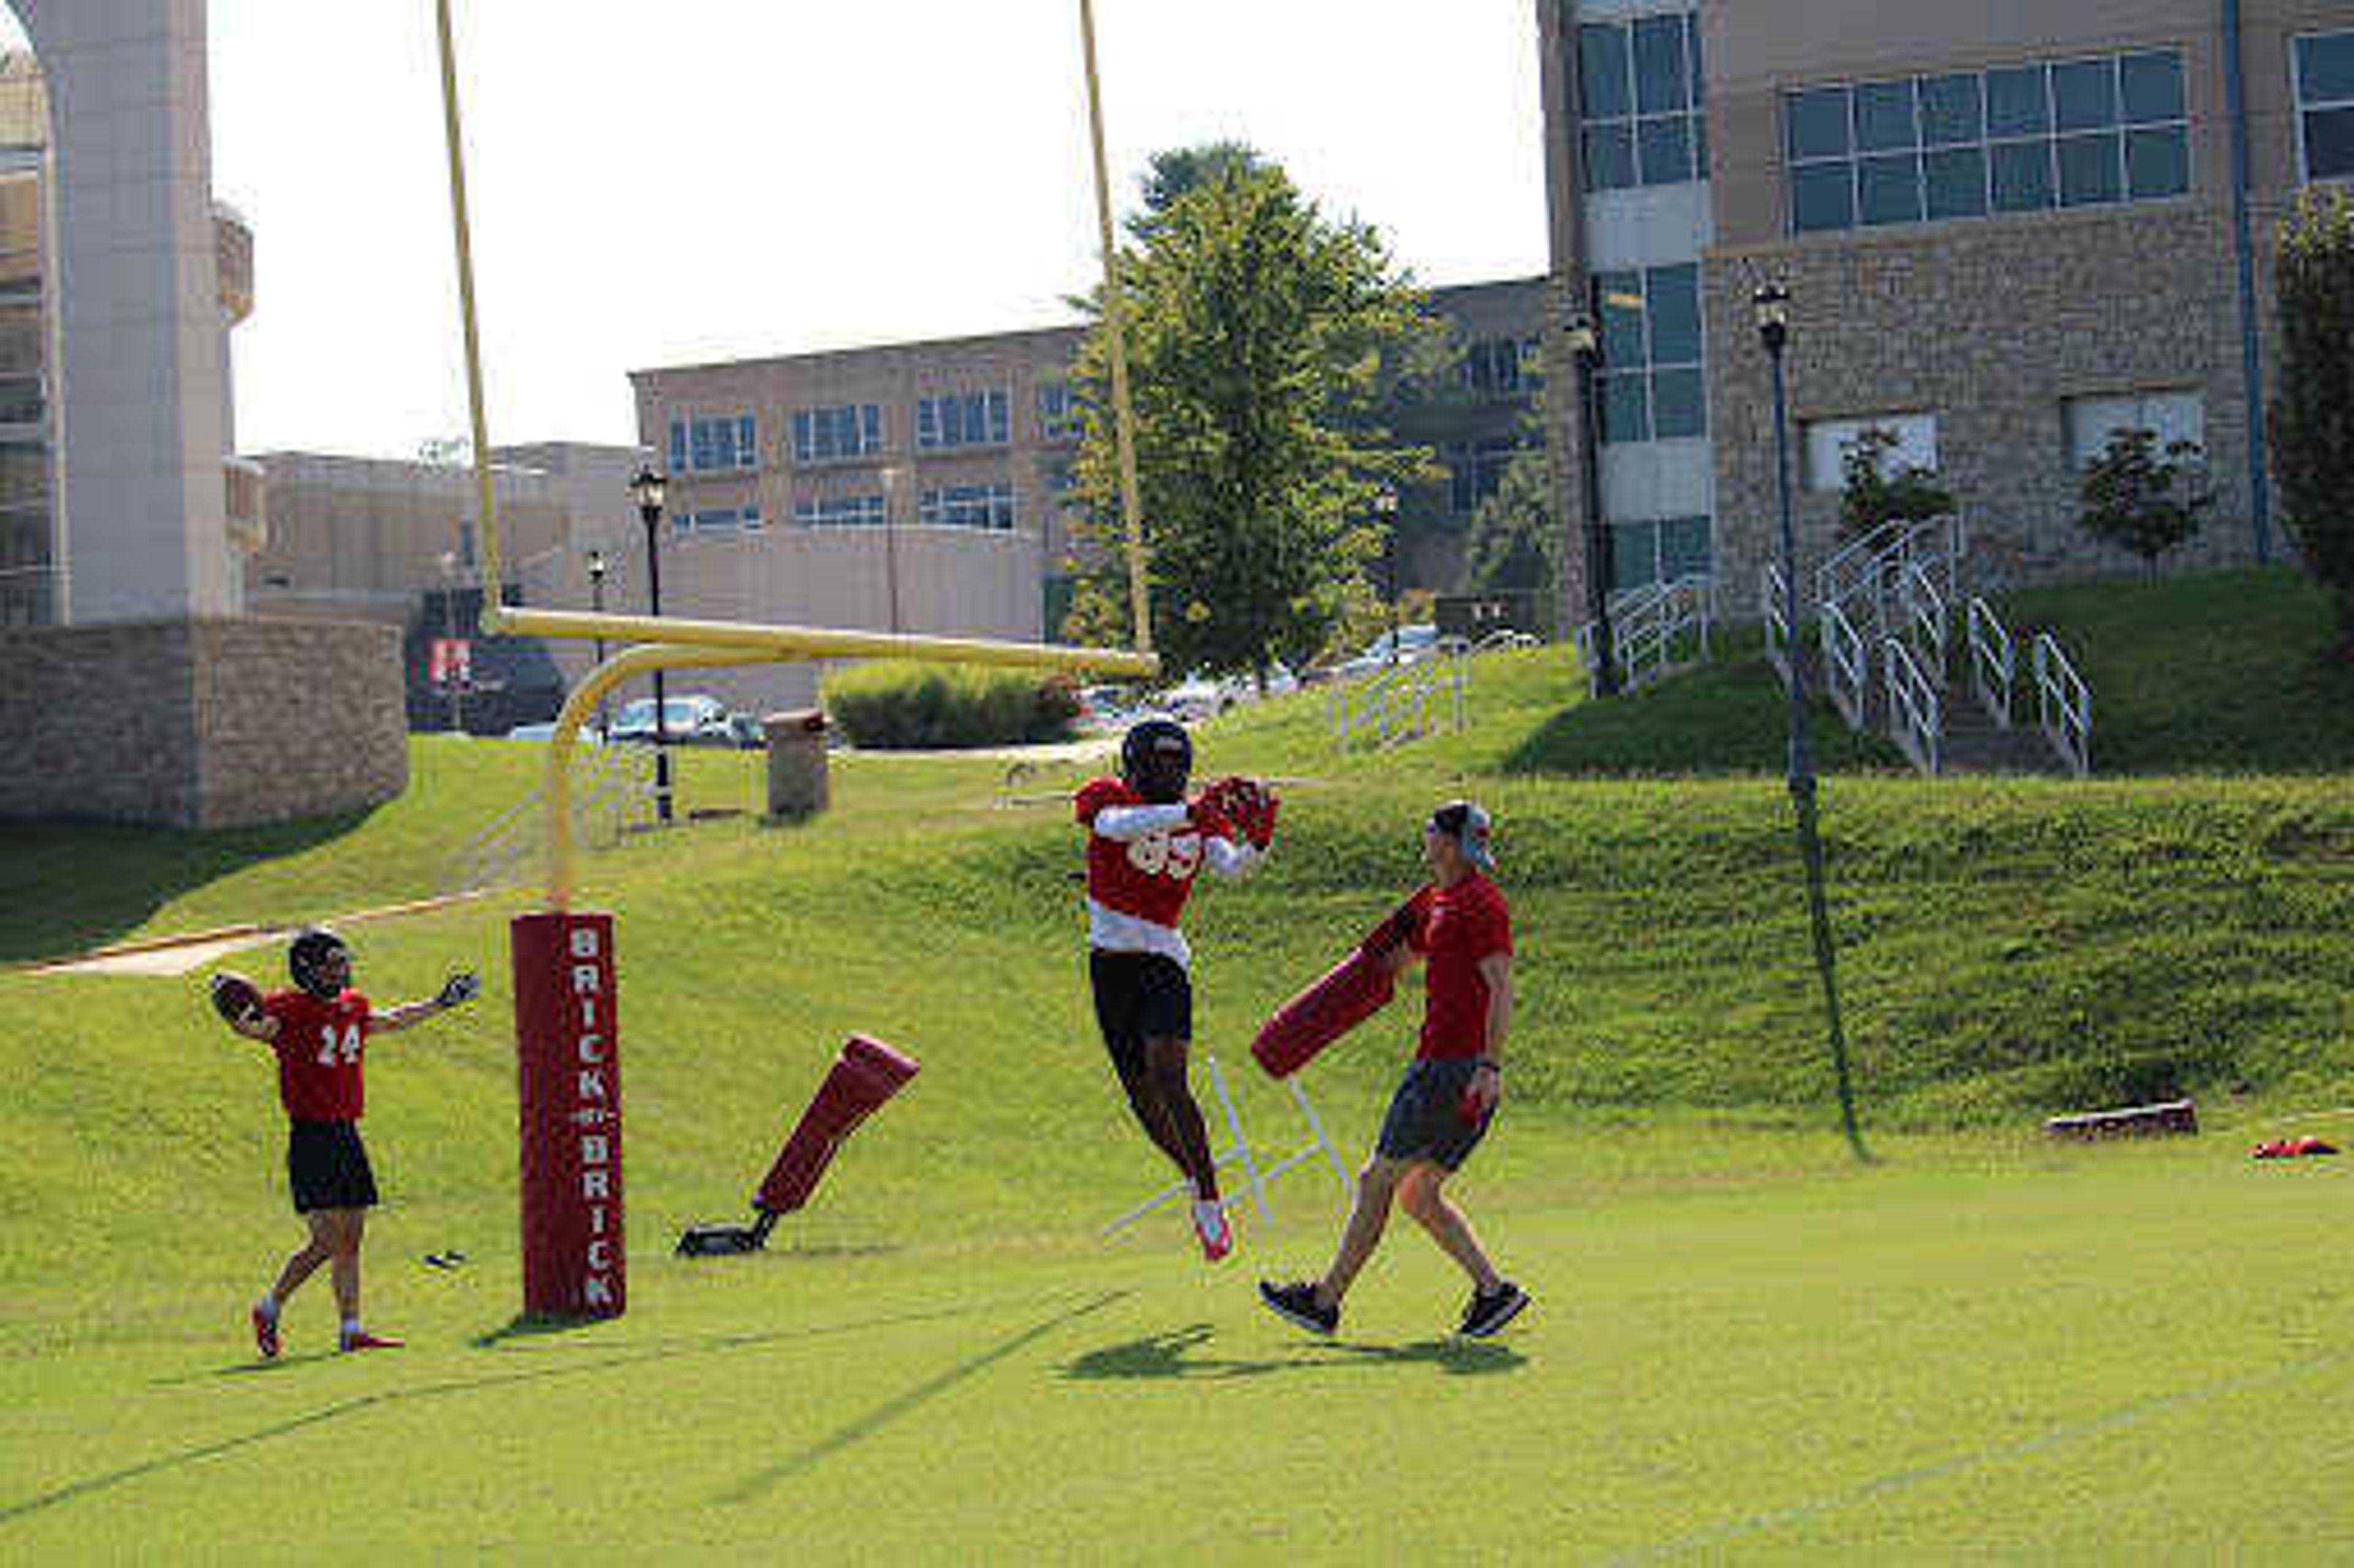 Senior wide receiver Aaron Alston makes a catch during a practice on Aug. 24 at Rosengarten Athletic Complex in Cape Girardeau. Alston is one of many returning members of the Redhawks offense in 2021.